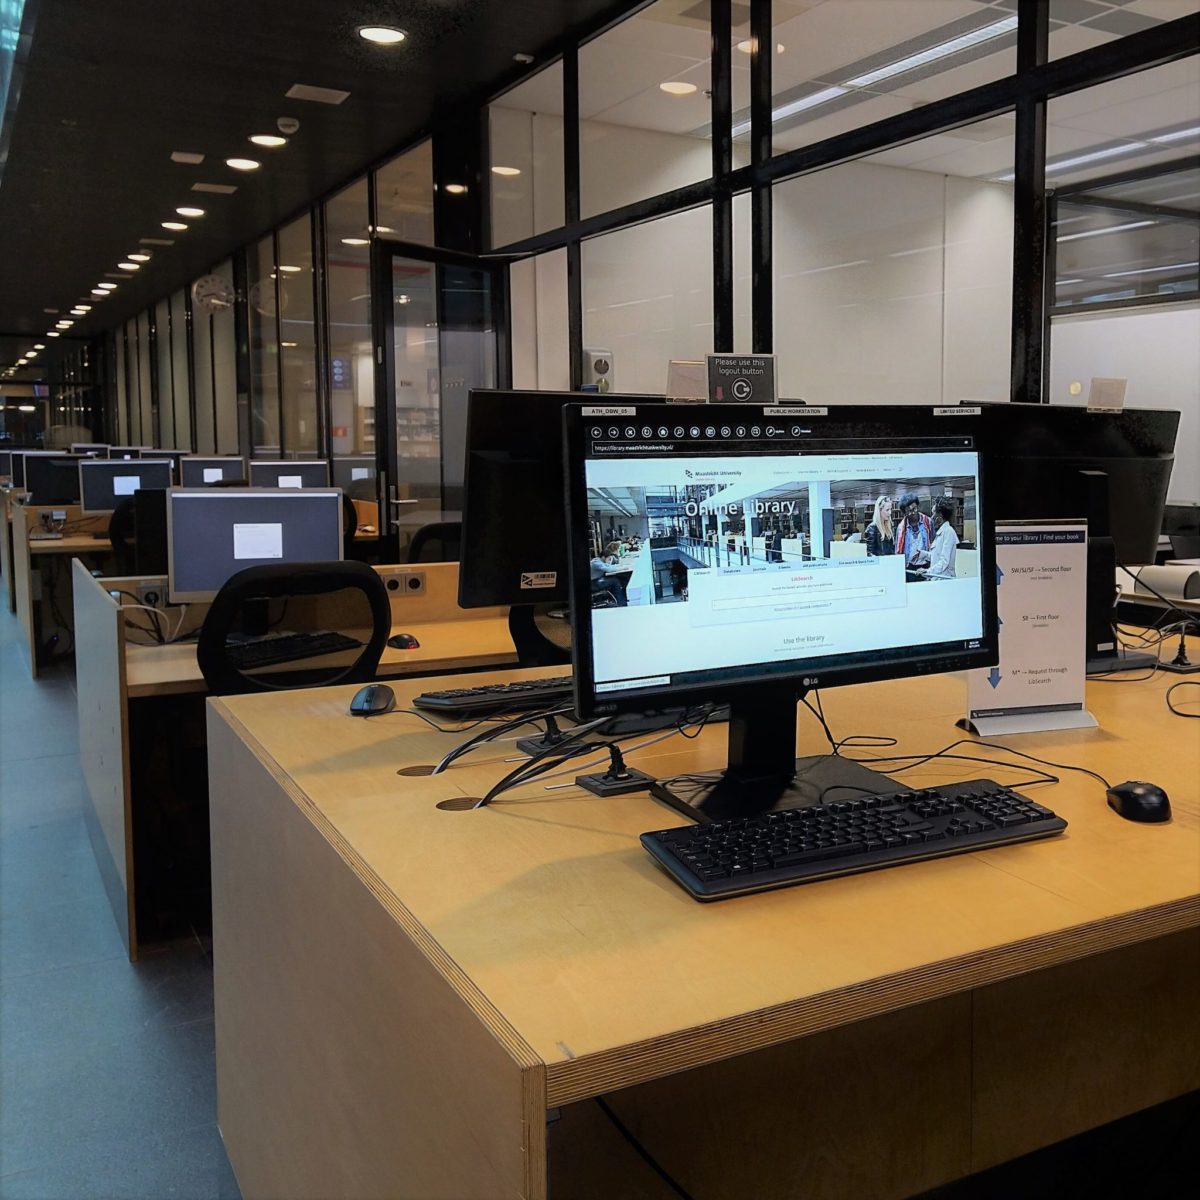 Computer facilities in the library